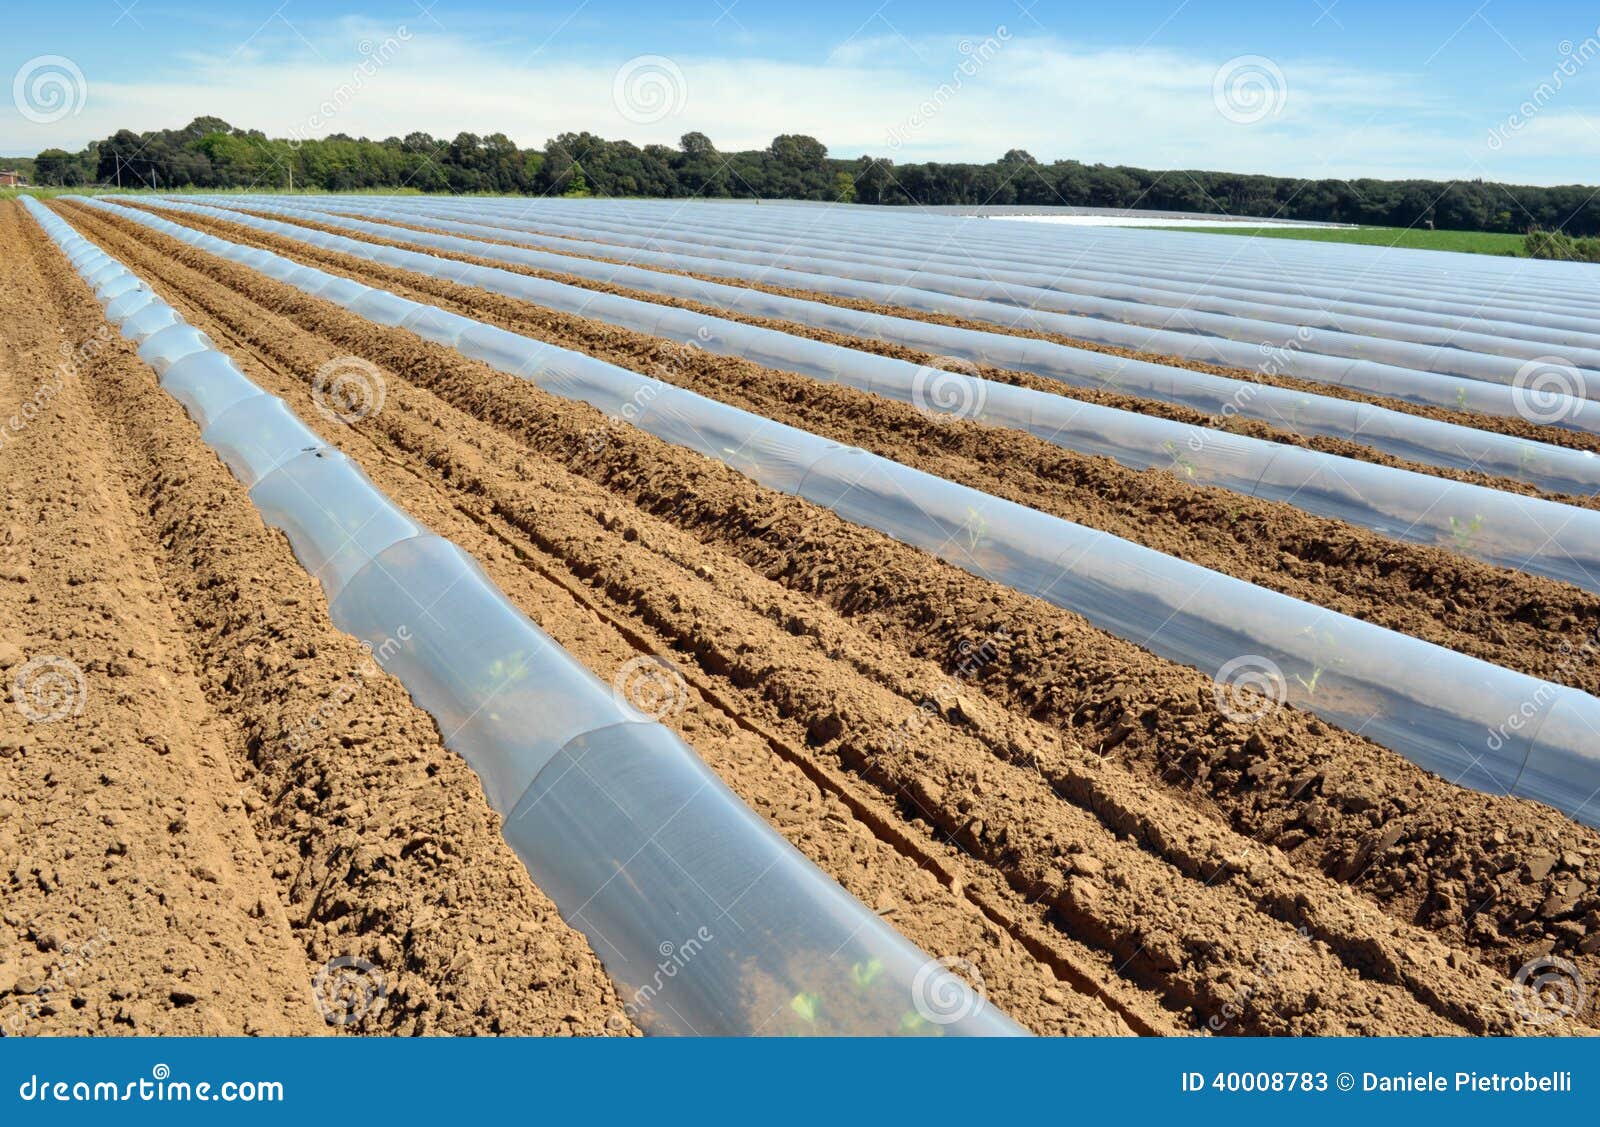 field of vegetable crops in rows covered with polythene cloches protection